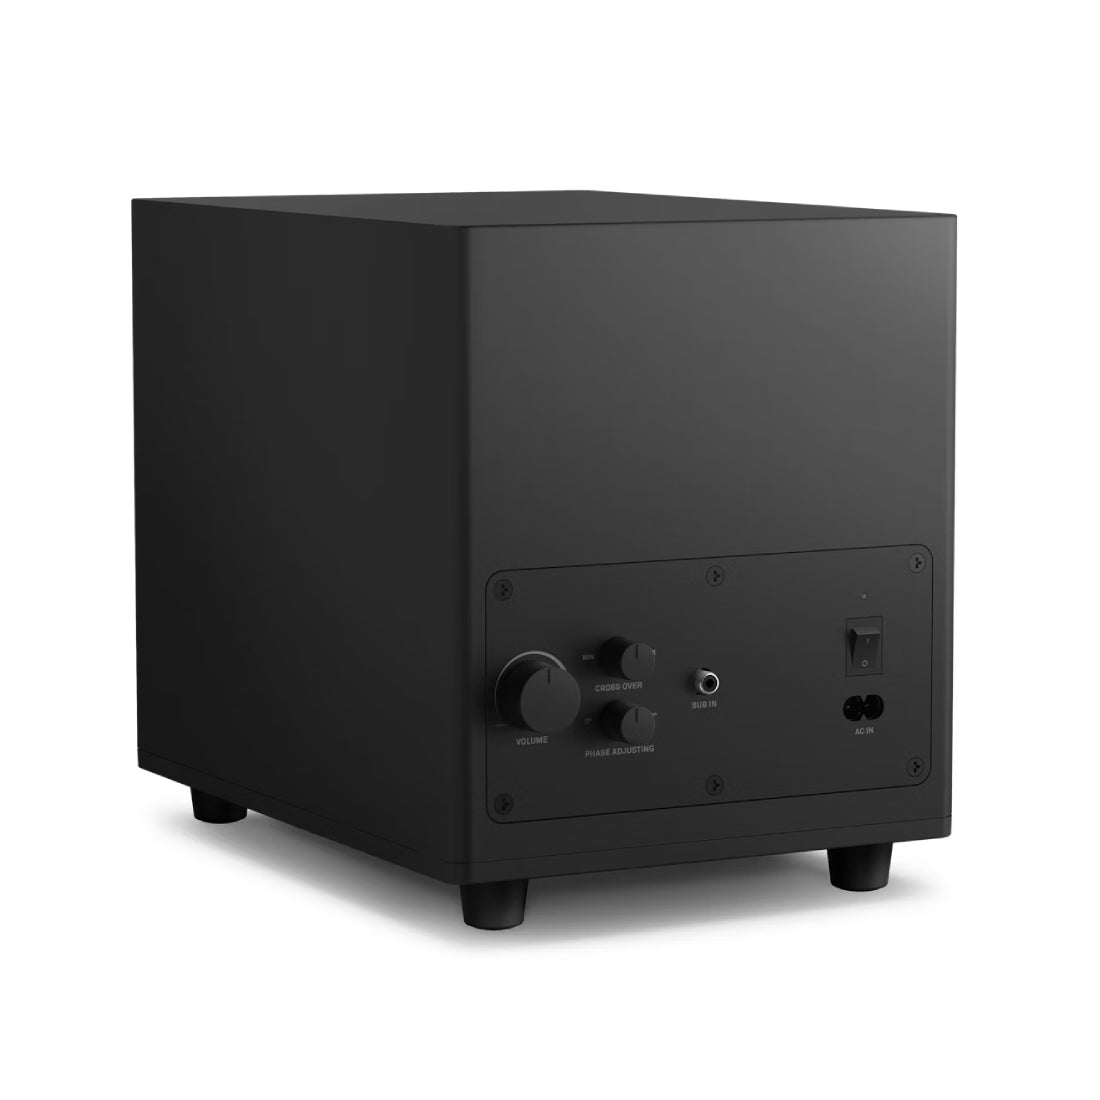 NZXT Relay 140W Desktop PC Gaming Subwoofer - مكبر صوت - Store 974 | ستور ٩٧٤